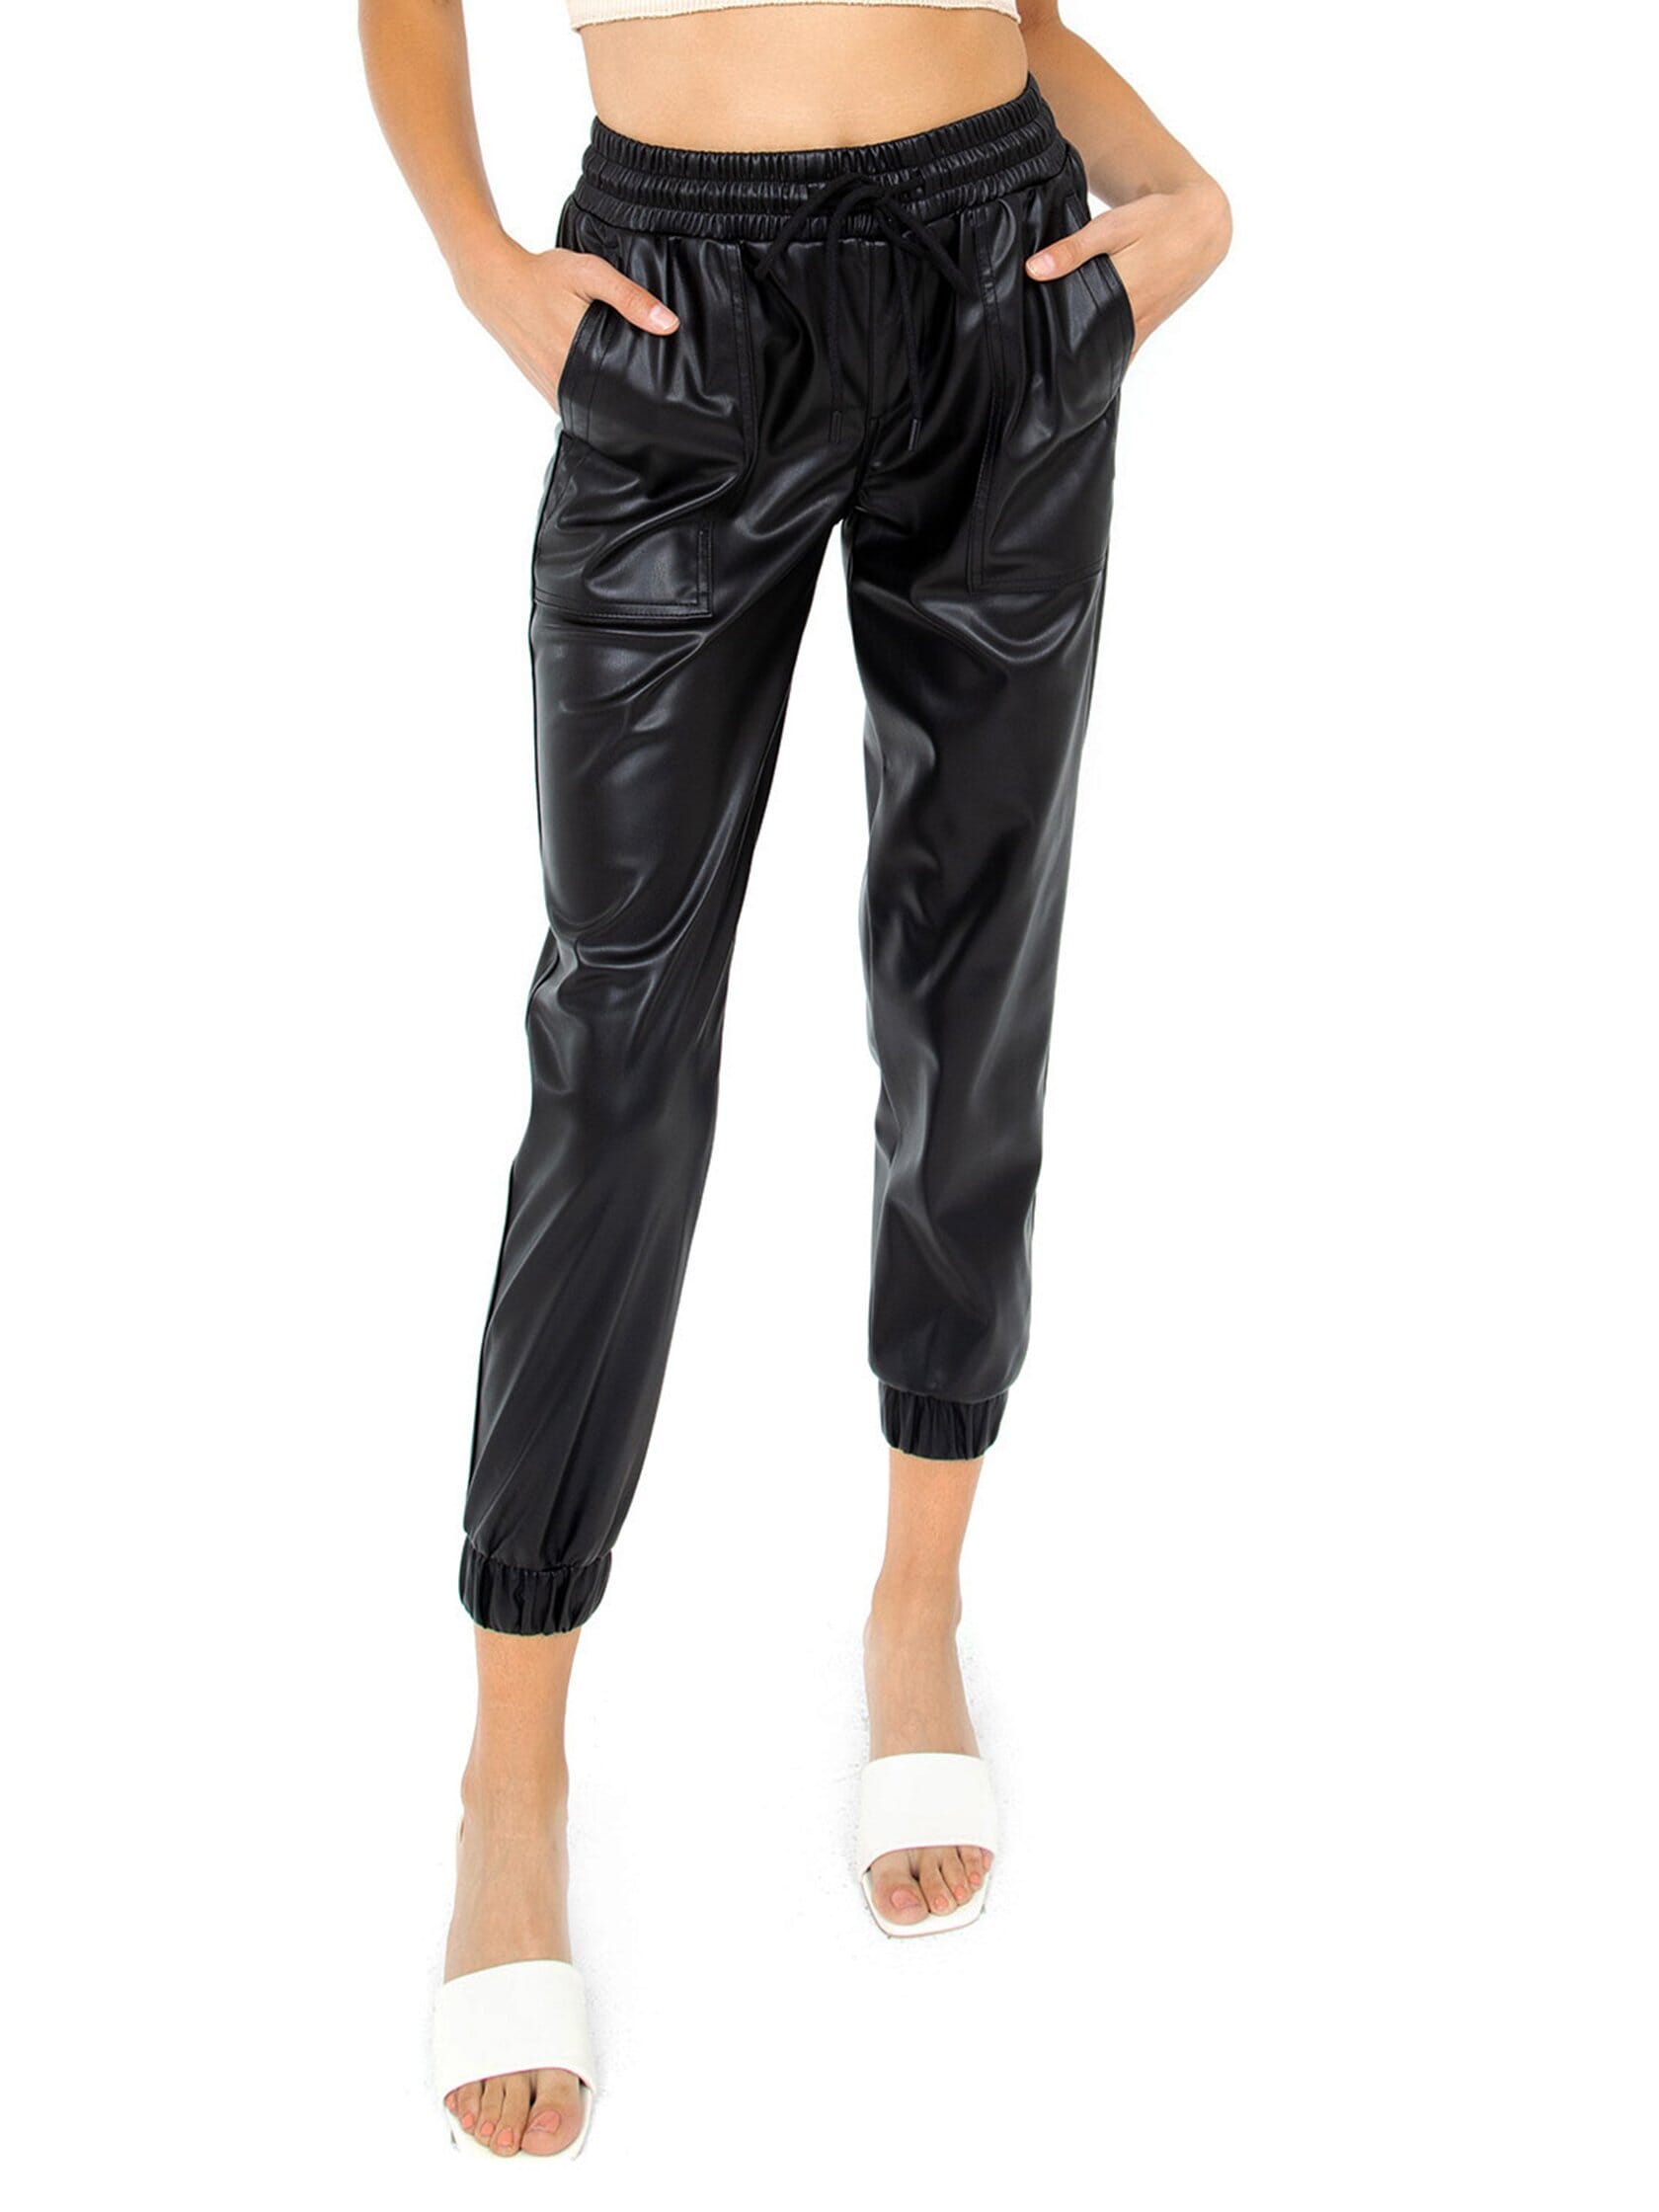 Blank NYC Leather Joggers Sale item